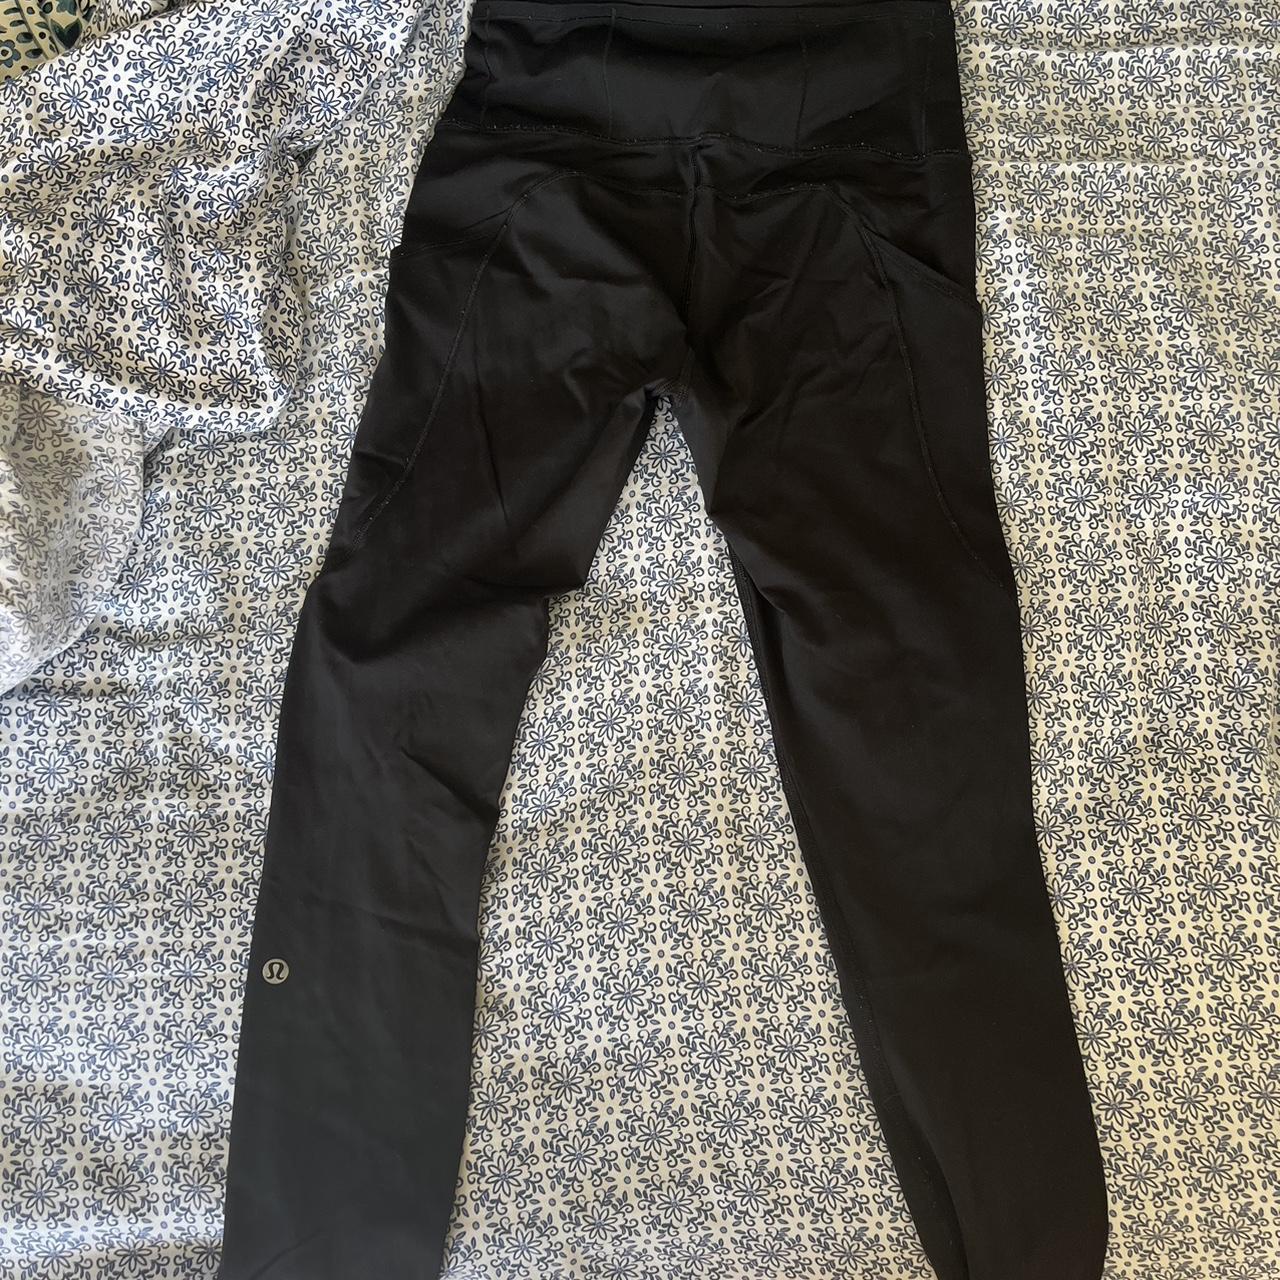 Skin tight leggings with pockets. Kids large but can - Depop